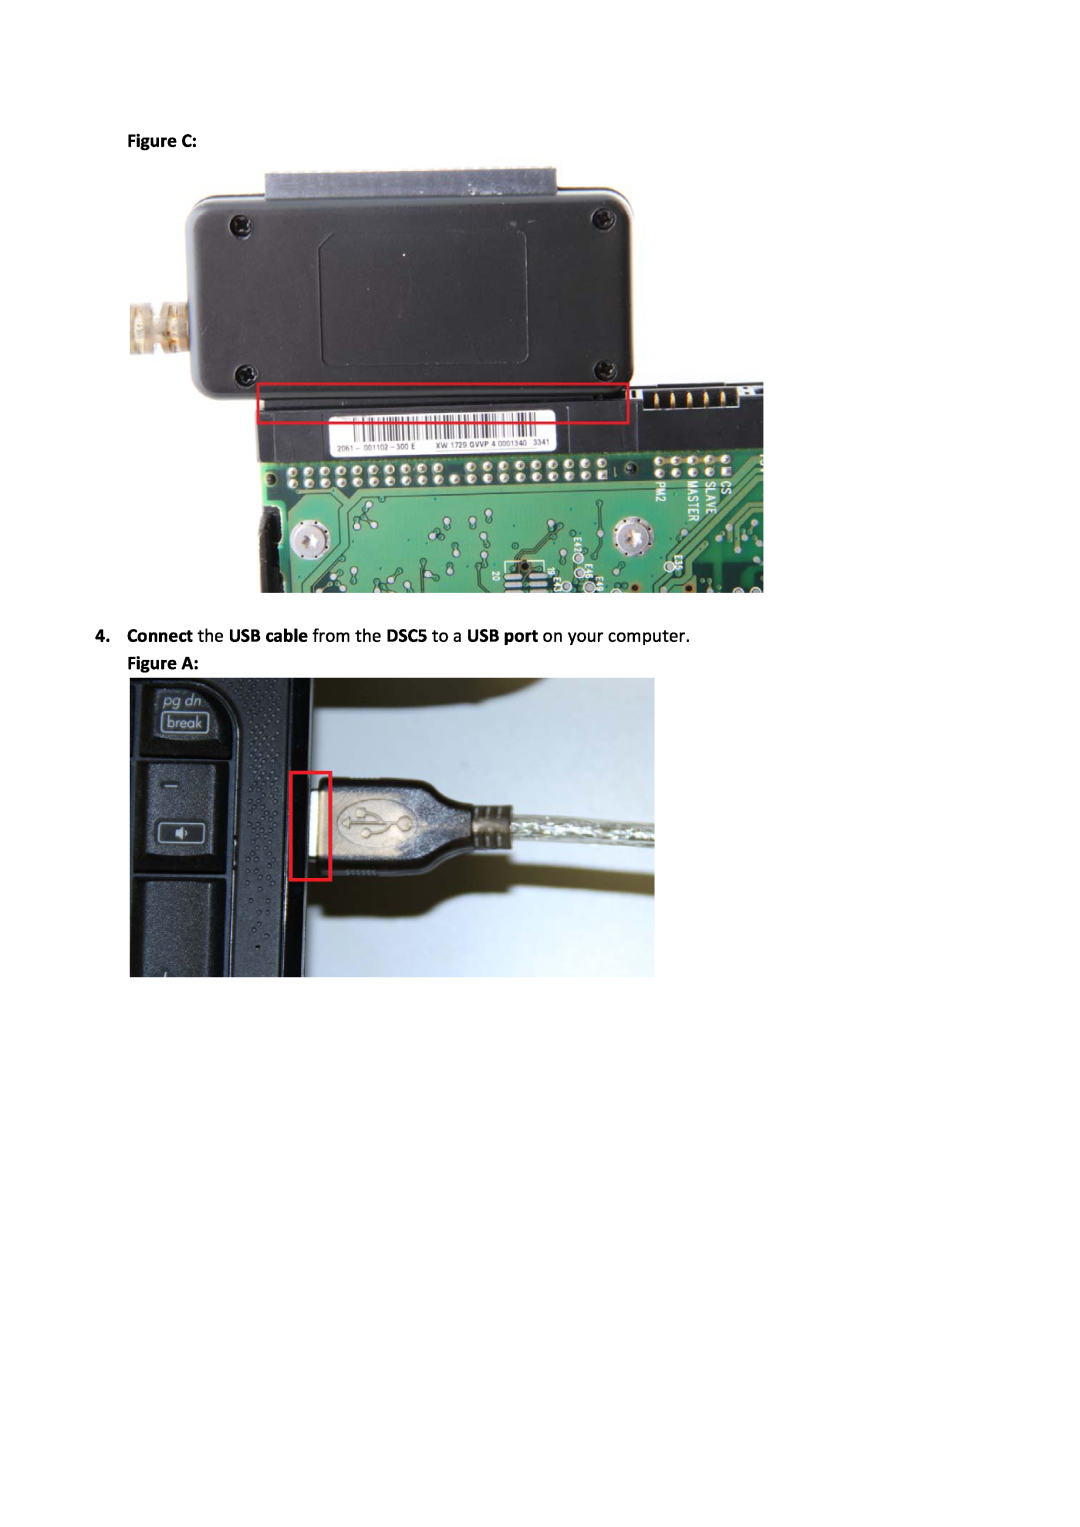 Sabrent USBDSC5 manual Figure C, Connect the USB cable from the DSC5 to a USB port on your computer, Figure A 